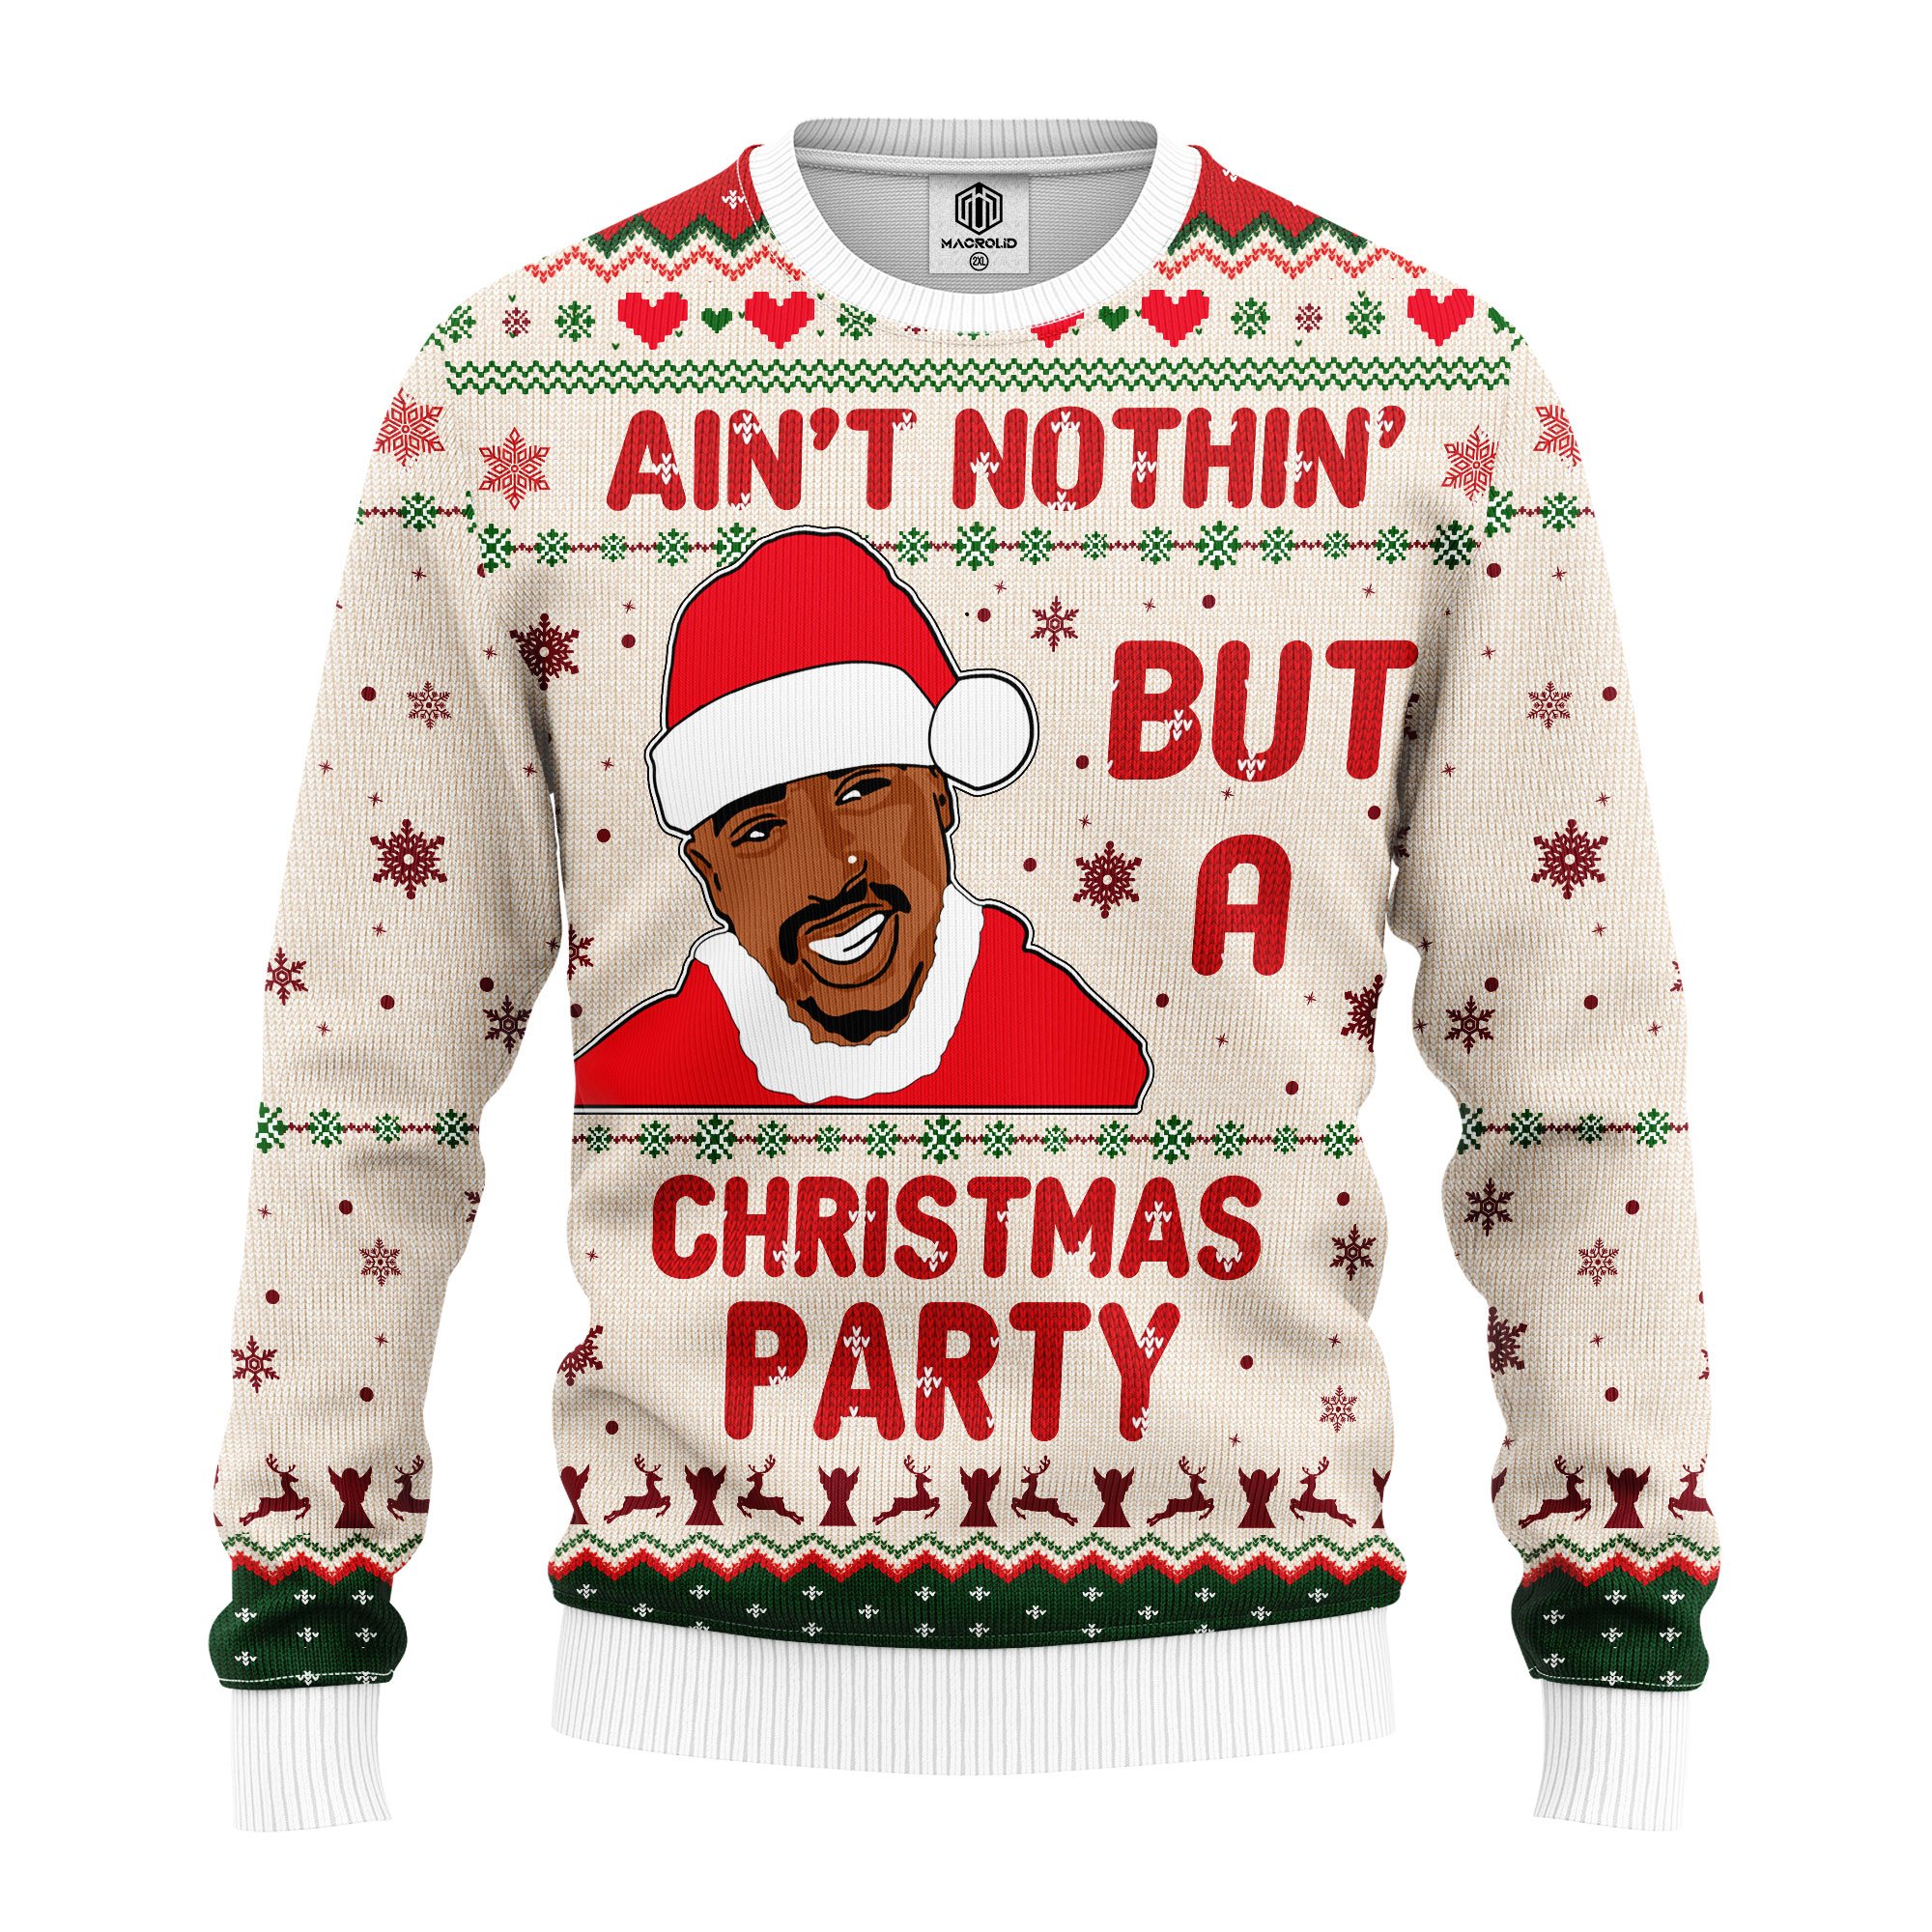 Ain’t nothing but a christmas party sweater – Teasearch3d 021120